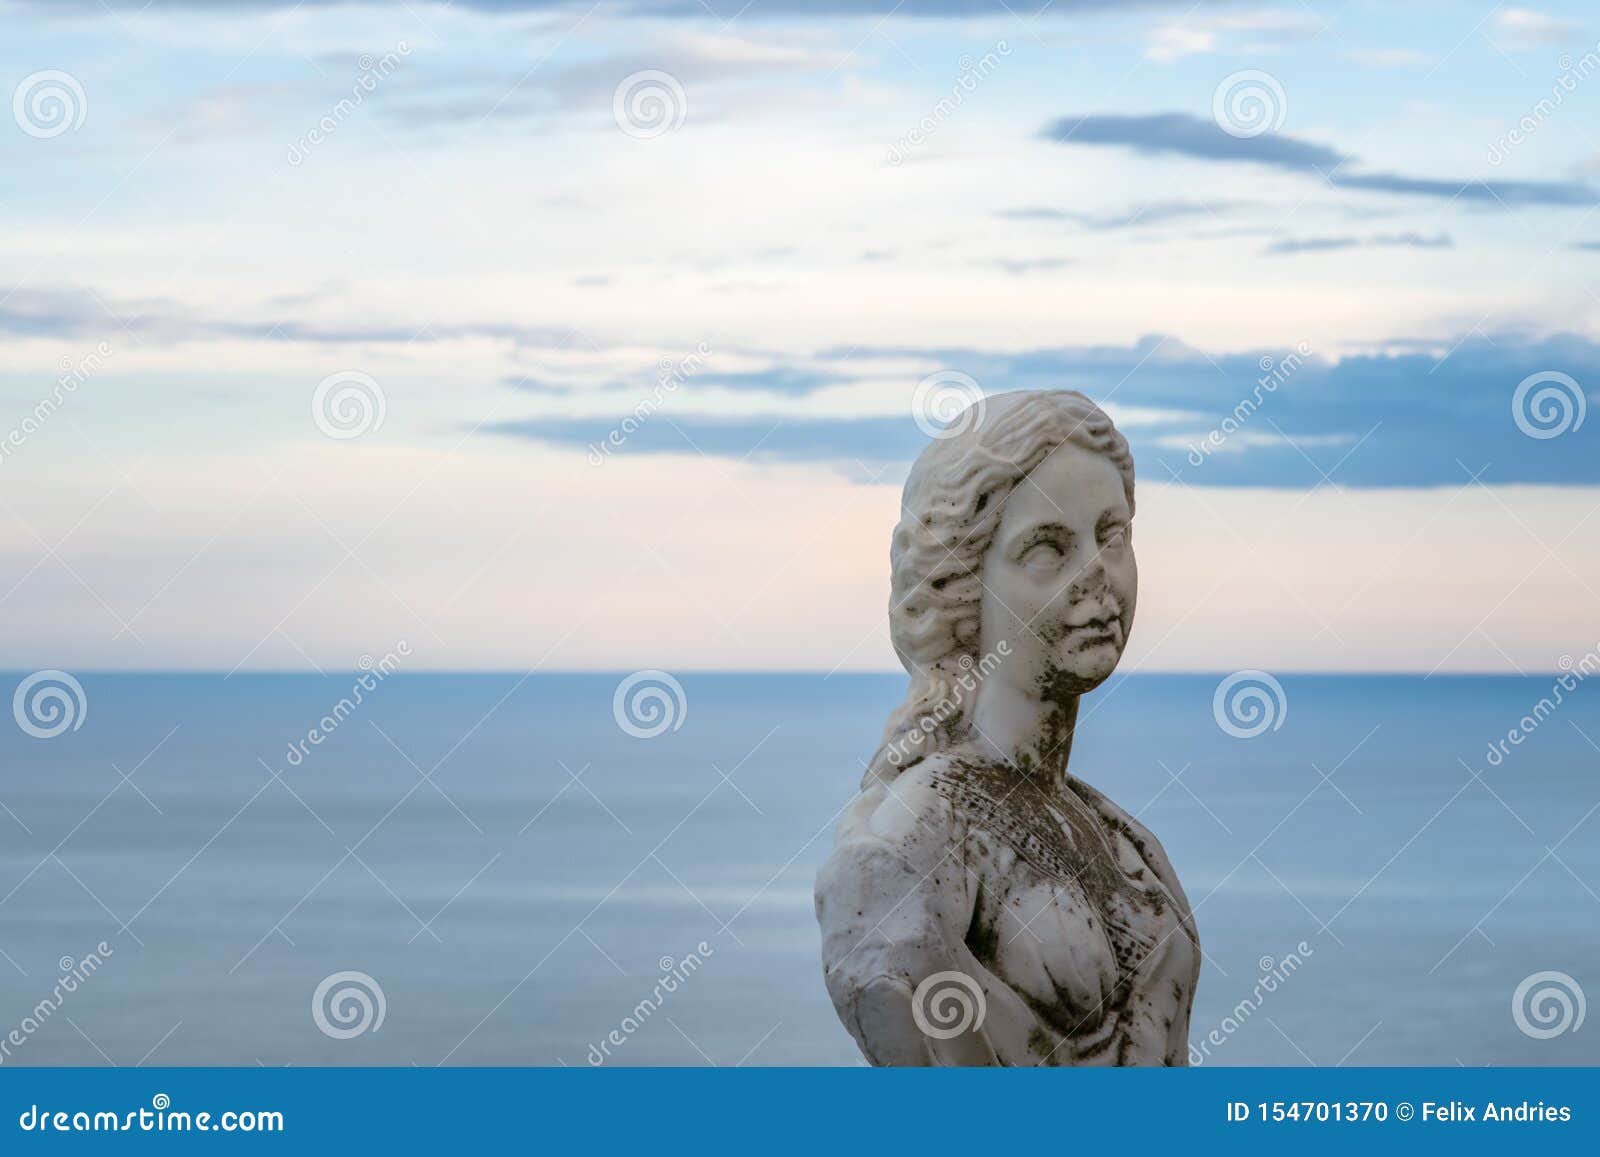 women statue from the belvedere, the so-called terrazza dell`infinito, the terrace of infinity seen on the sunset, villa cimbrone,